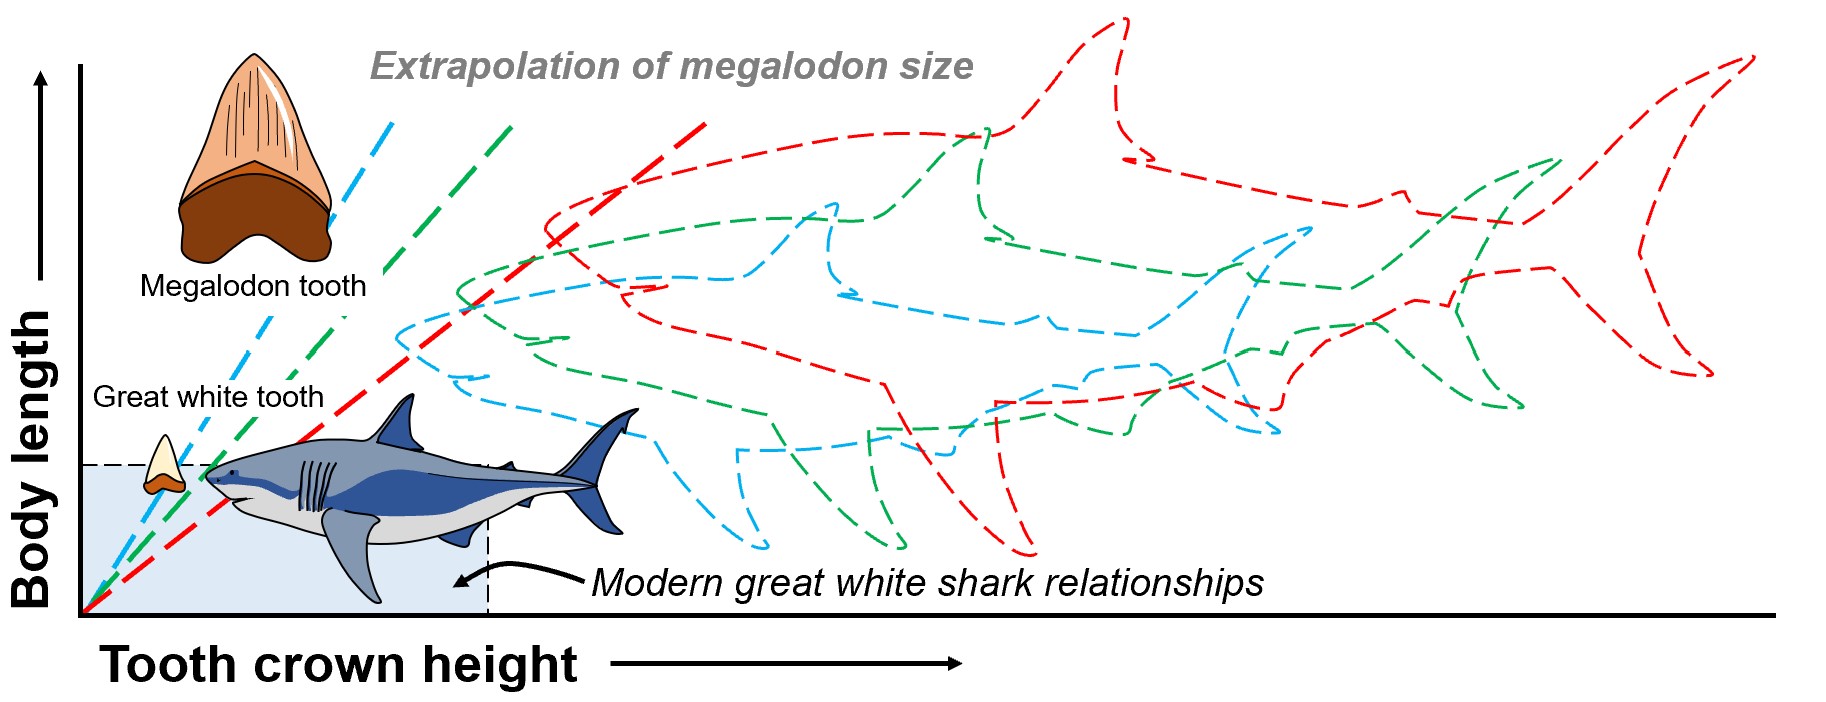 The size of megalodon is estimated based on the size of its teeth and a mathematical relationship between tooth size (generally crown height) and body size in modern great white sharks.